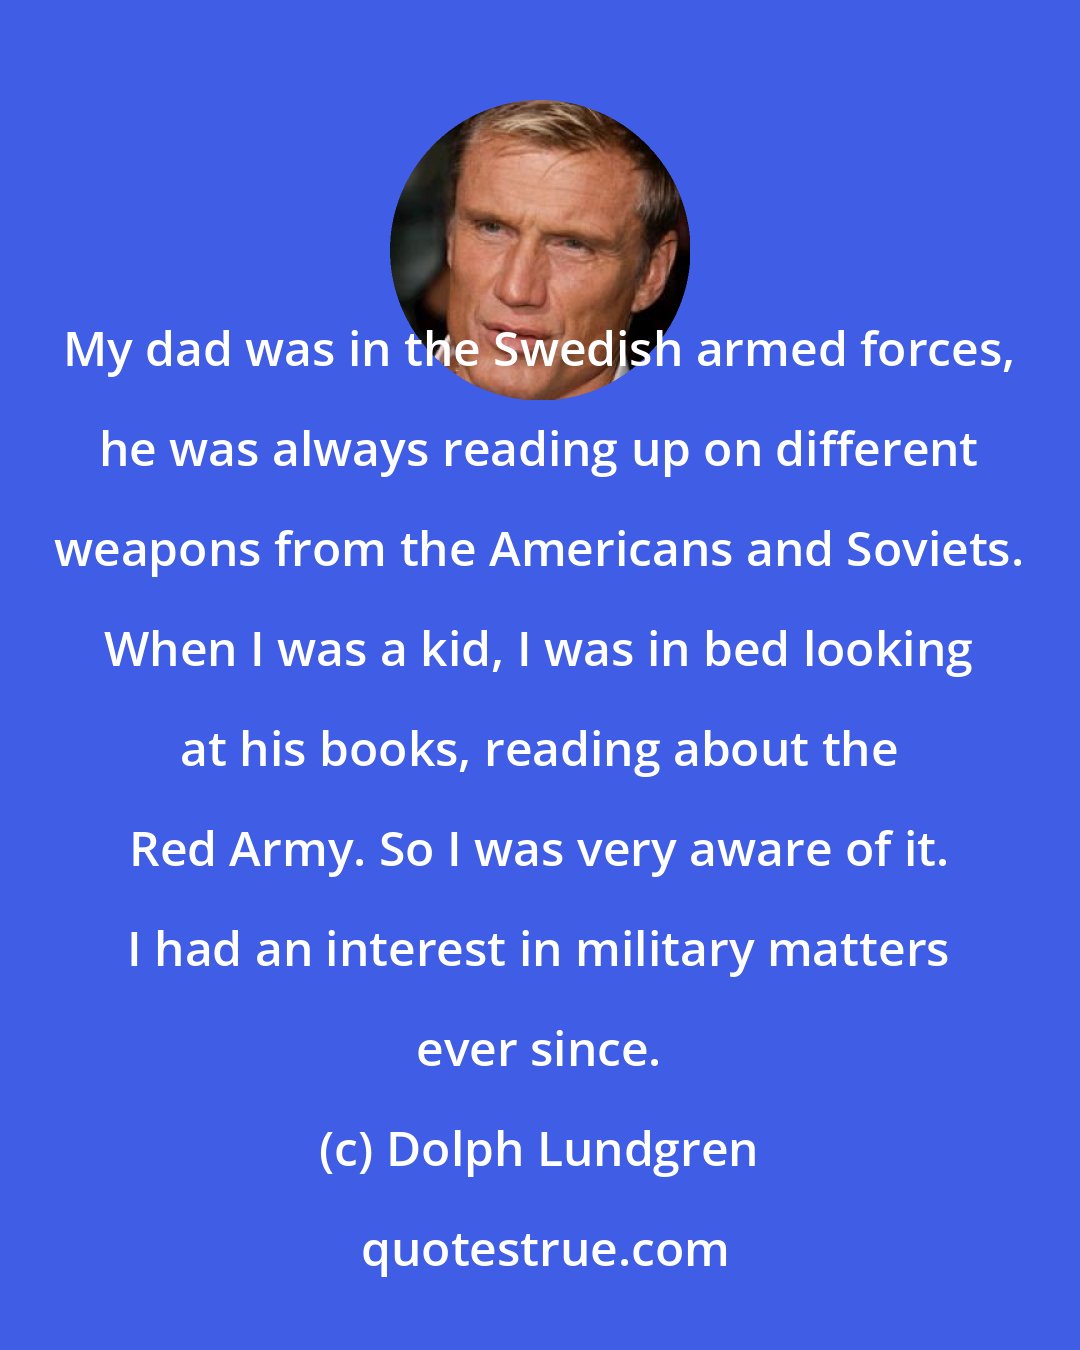 Dolph Lundgren: My dad was in the Swedish armed forces, he was always reading up on different weapons from the Americans and Soviets. When I was a kid, I was in bed looking at his books, reading about the Red Army. So I was very aware of it. I had an interest in military matters ever since.